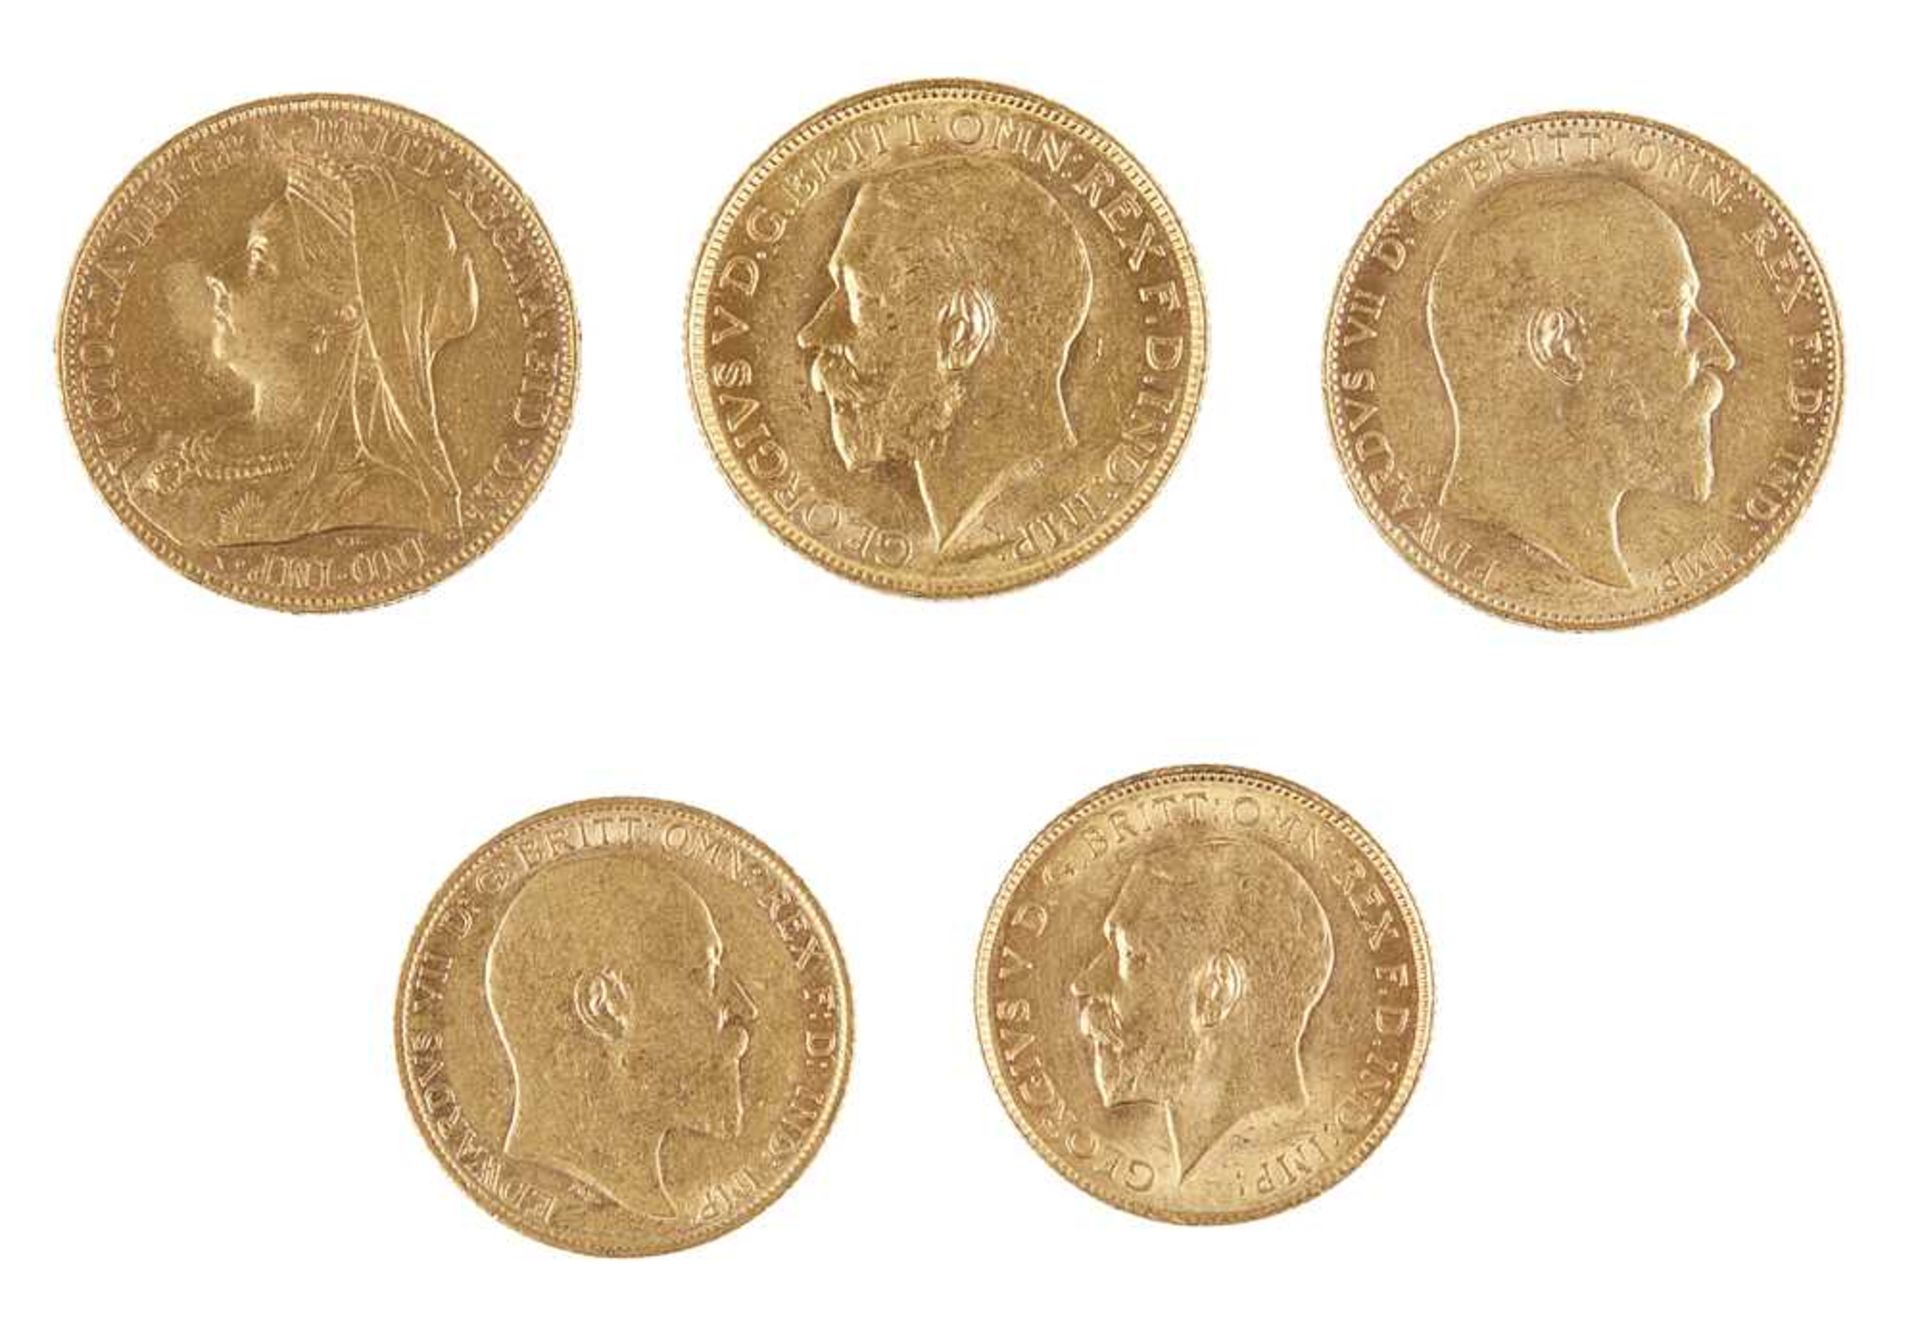 Three sovereigns and two half sovereigns